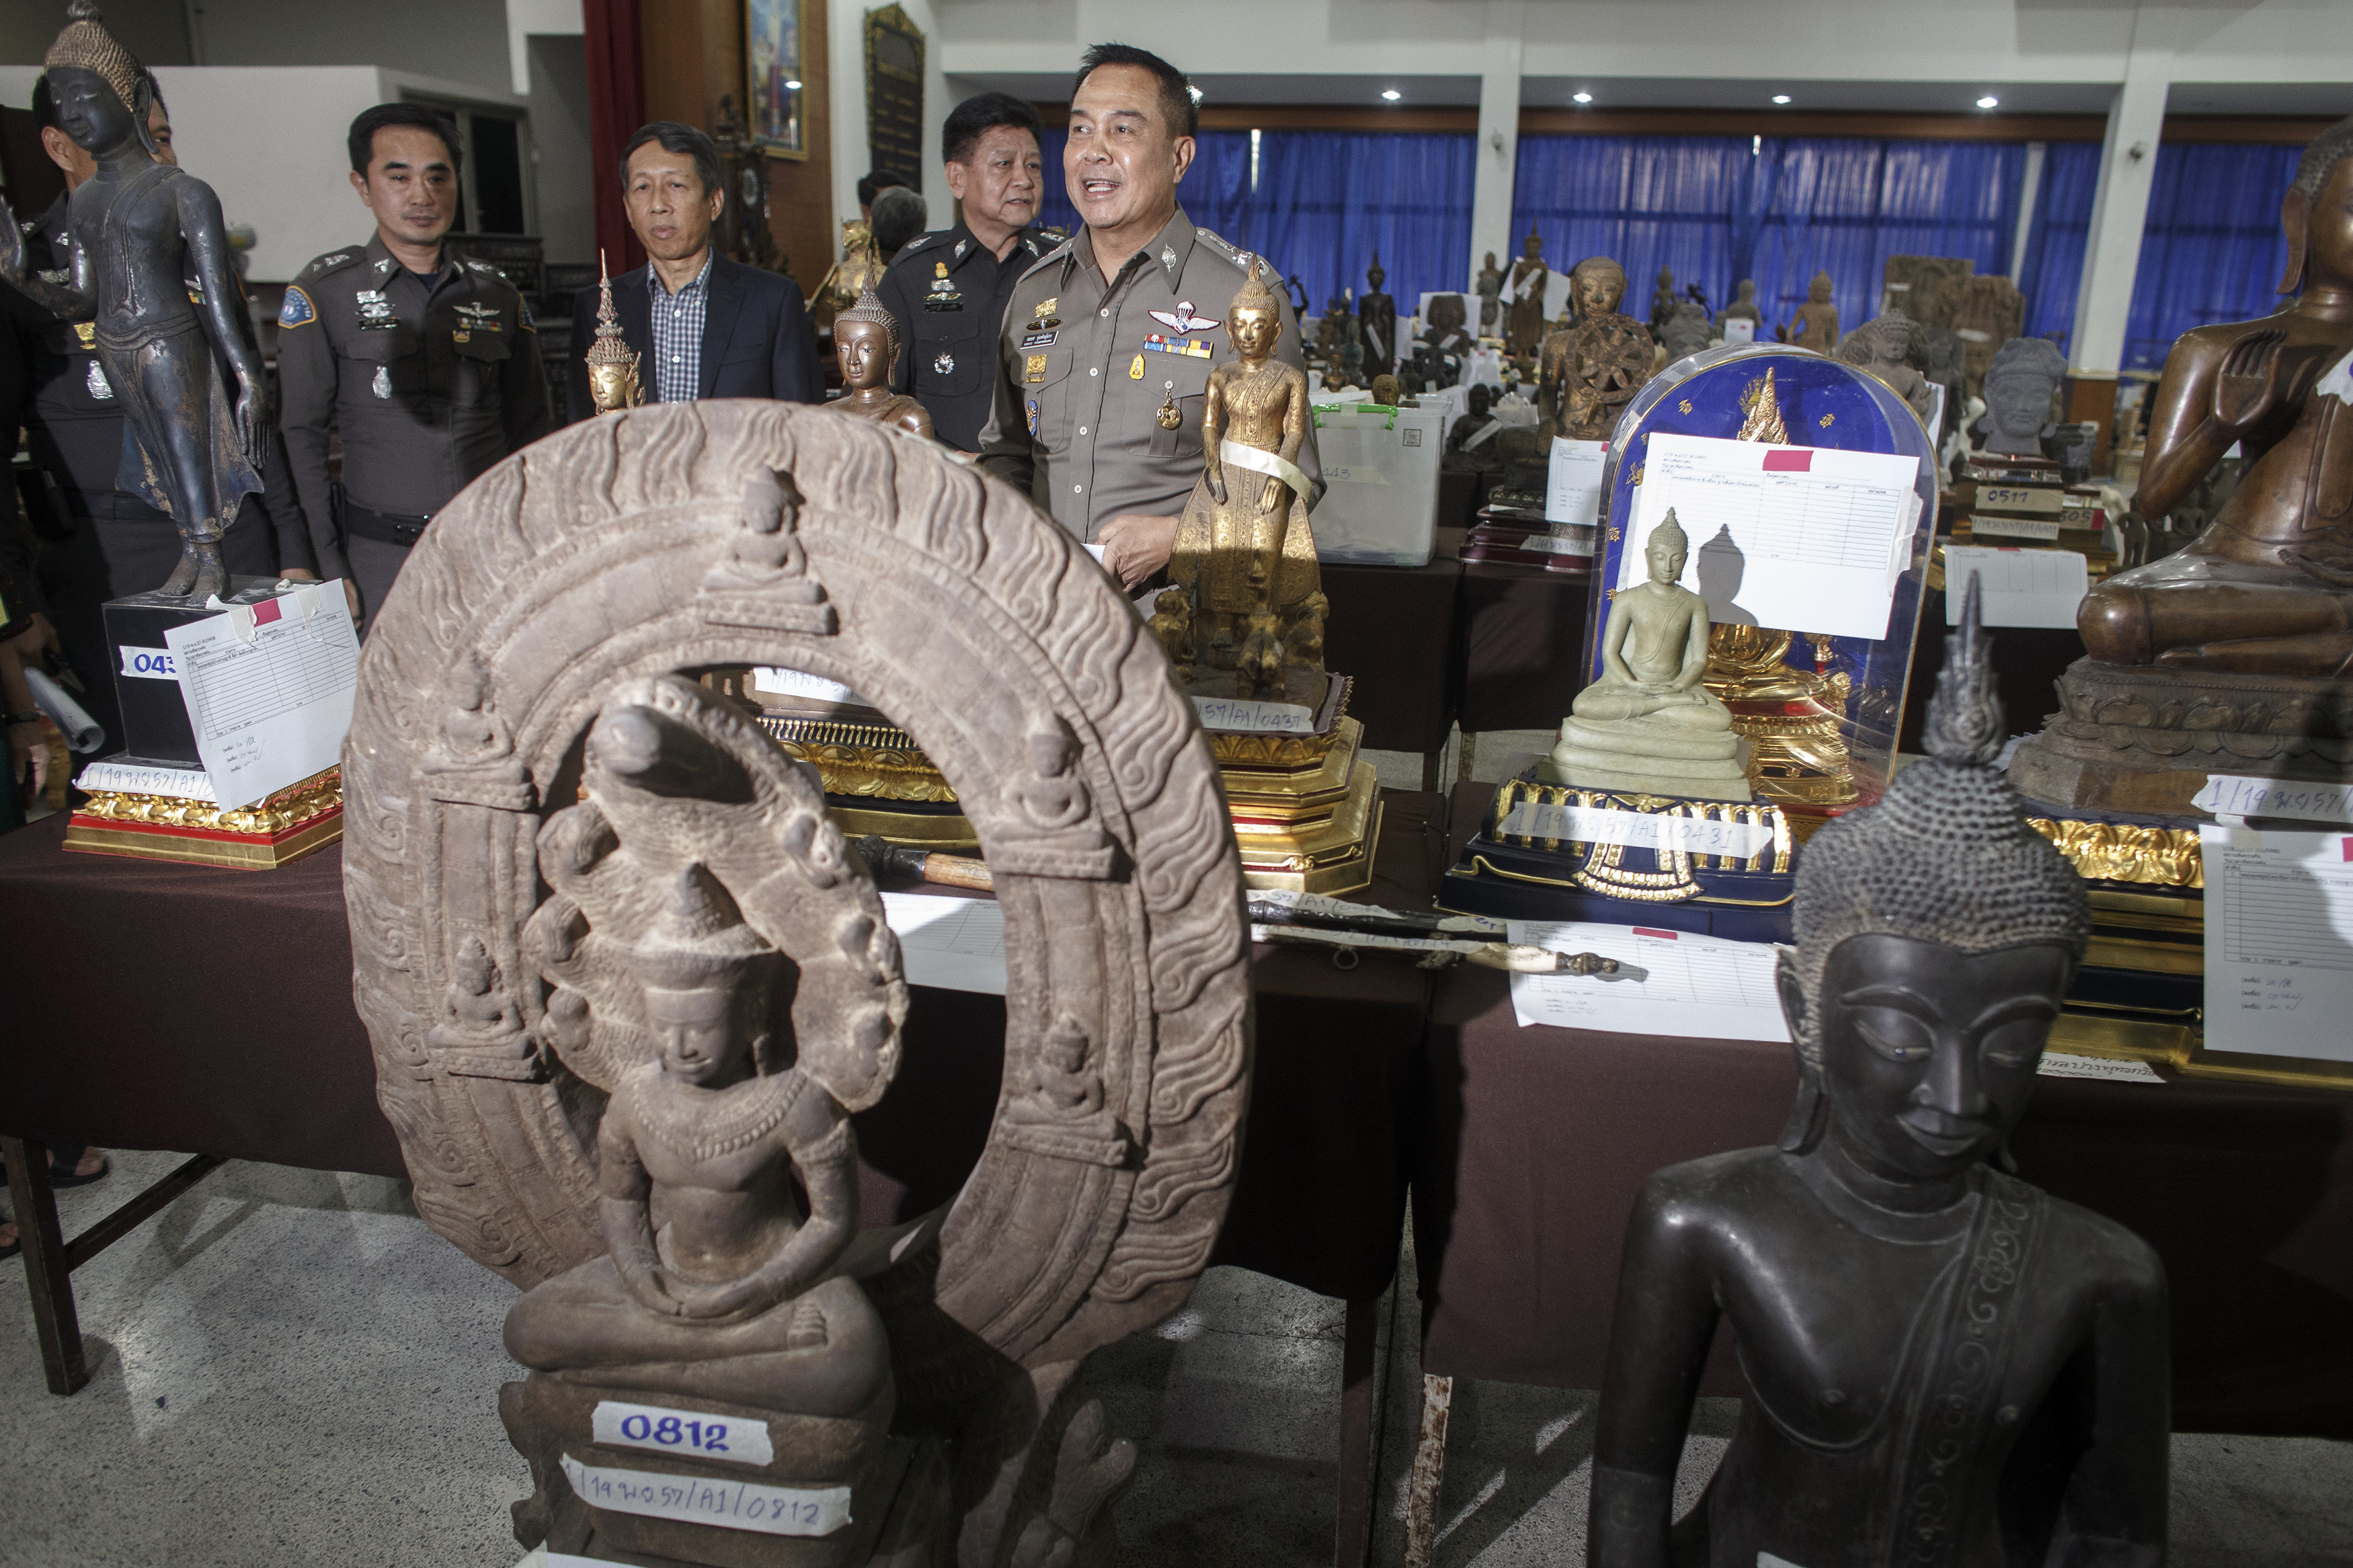 General Somyot Poompanmuang, chief of Royal Thai Police, stands among antique Buddha statues that were seized during an investigation into former Central Investigation Bureau chief Pongpat Chayaphan, at a military base in Bangkok on Nov. 26, 2014 (Athit Perawongmetha—Reuters)